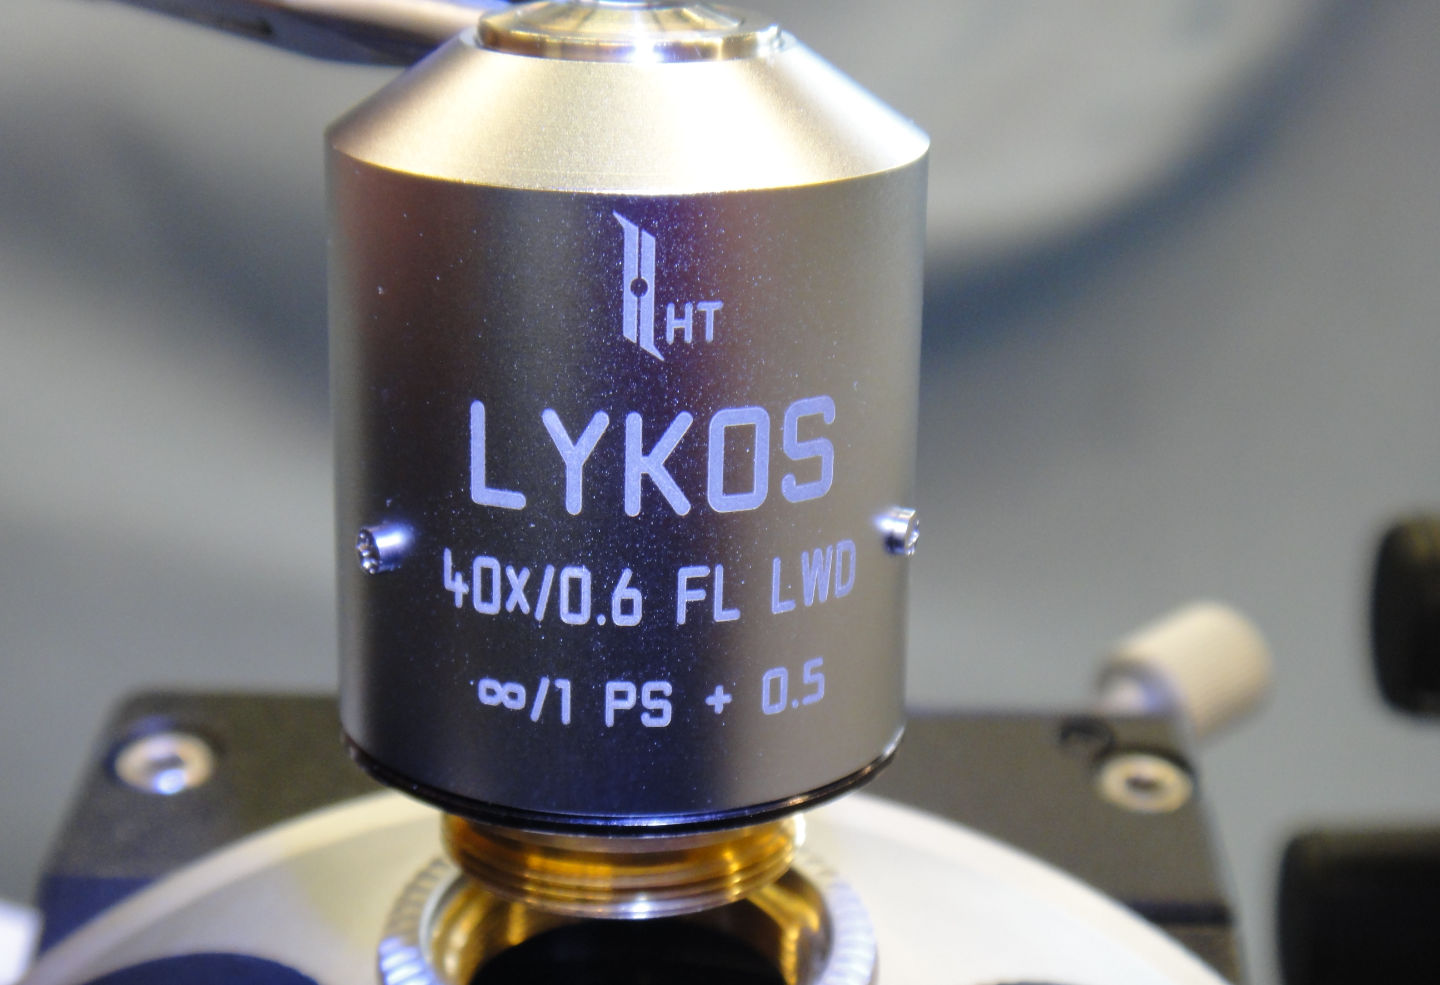 Hamilton Thorne LYKOS lasers are now available from Planer in the UK